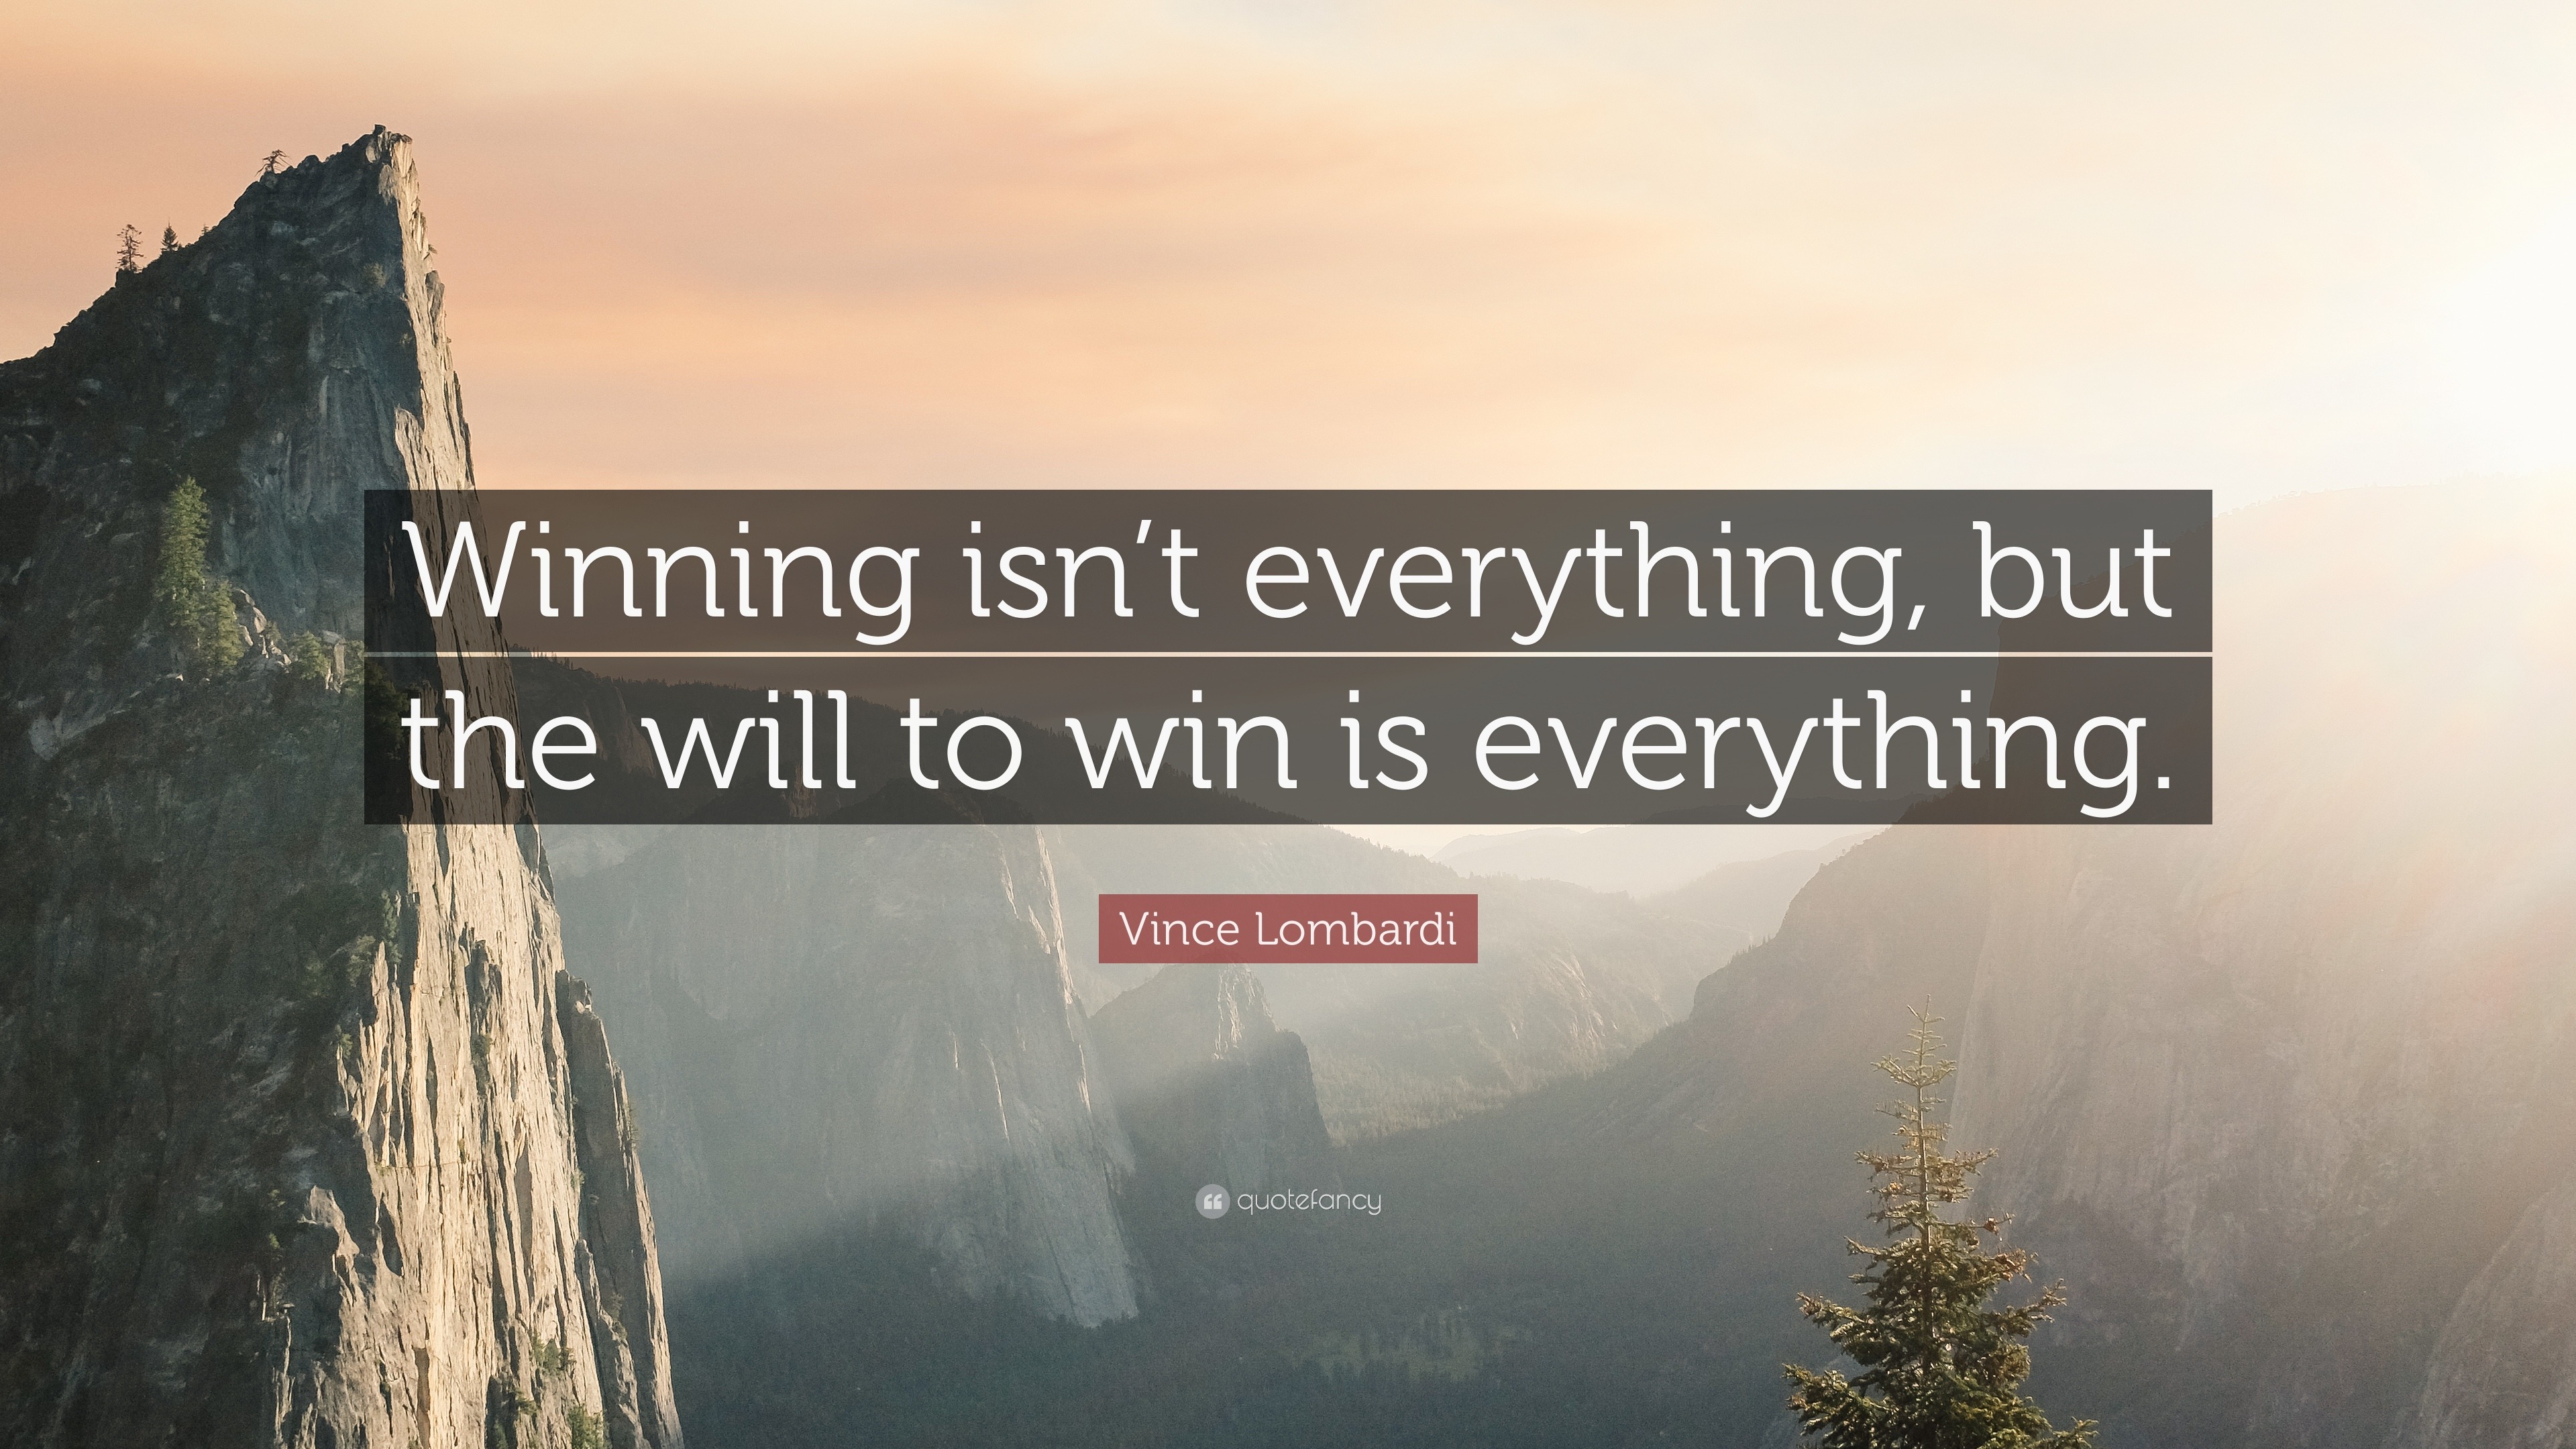 Vince Lombardi Inspirational Quotes